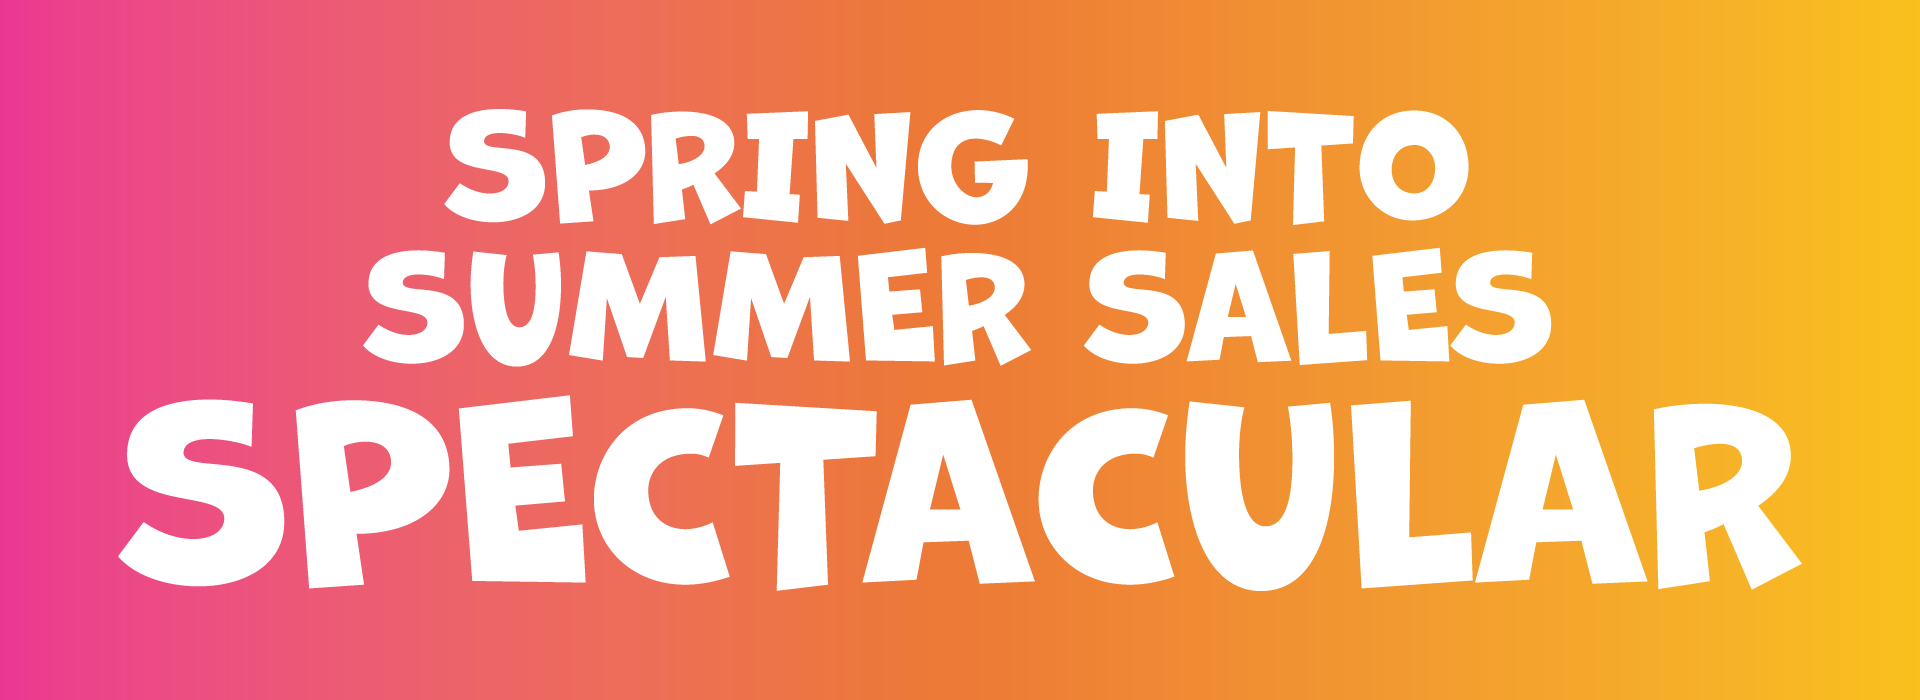 Spring Into Summer Sales Spectacular